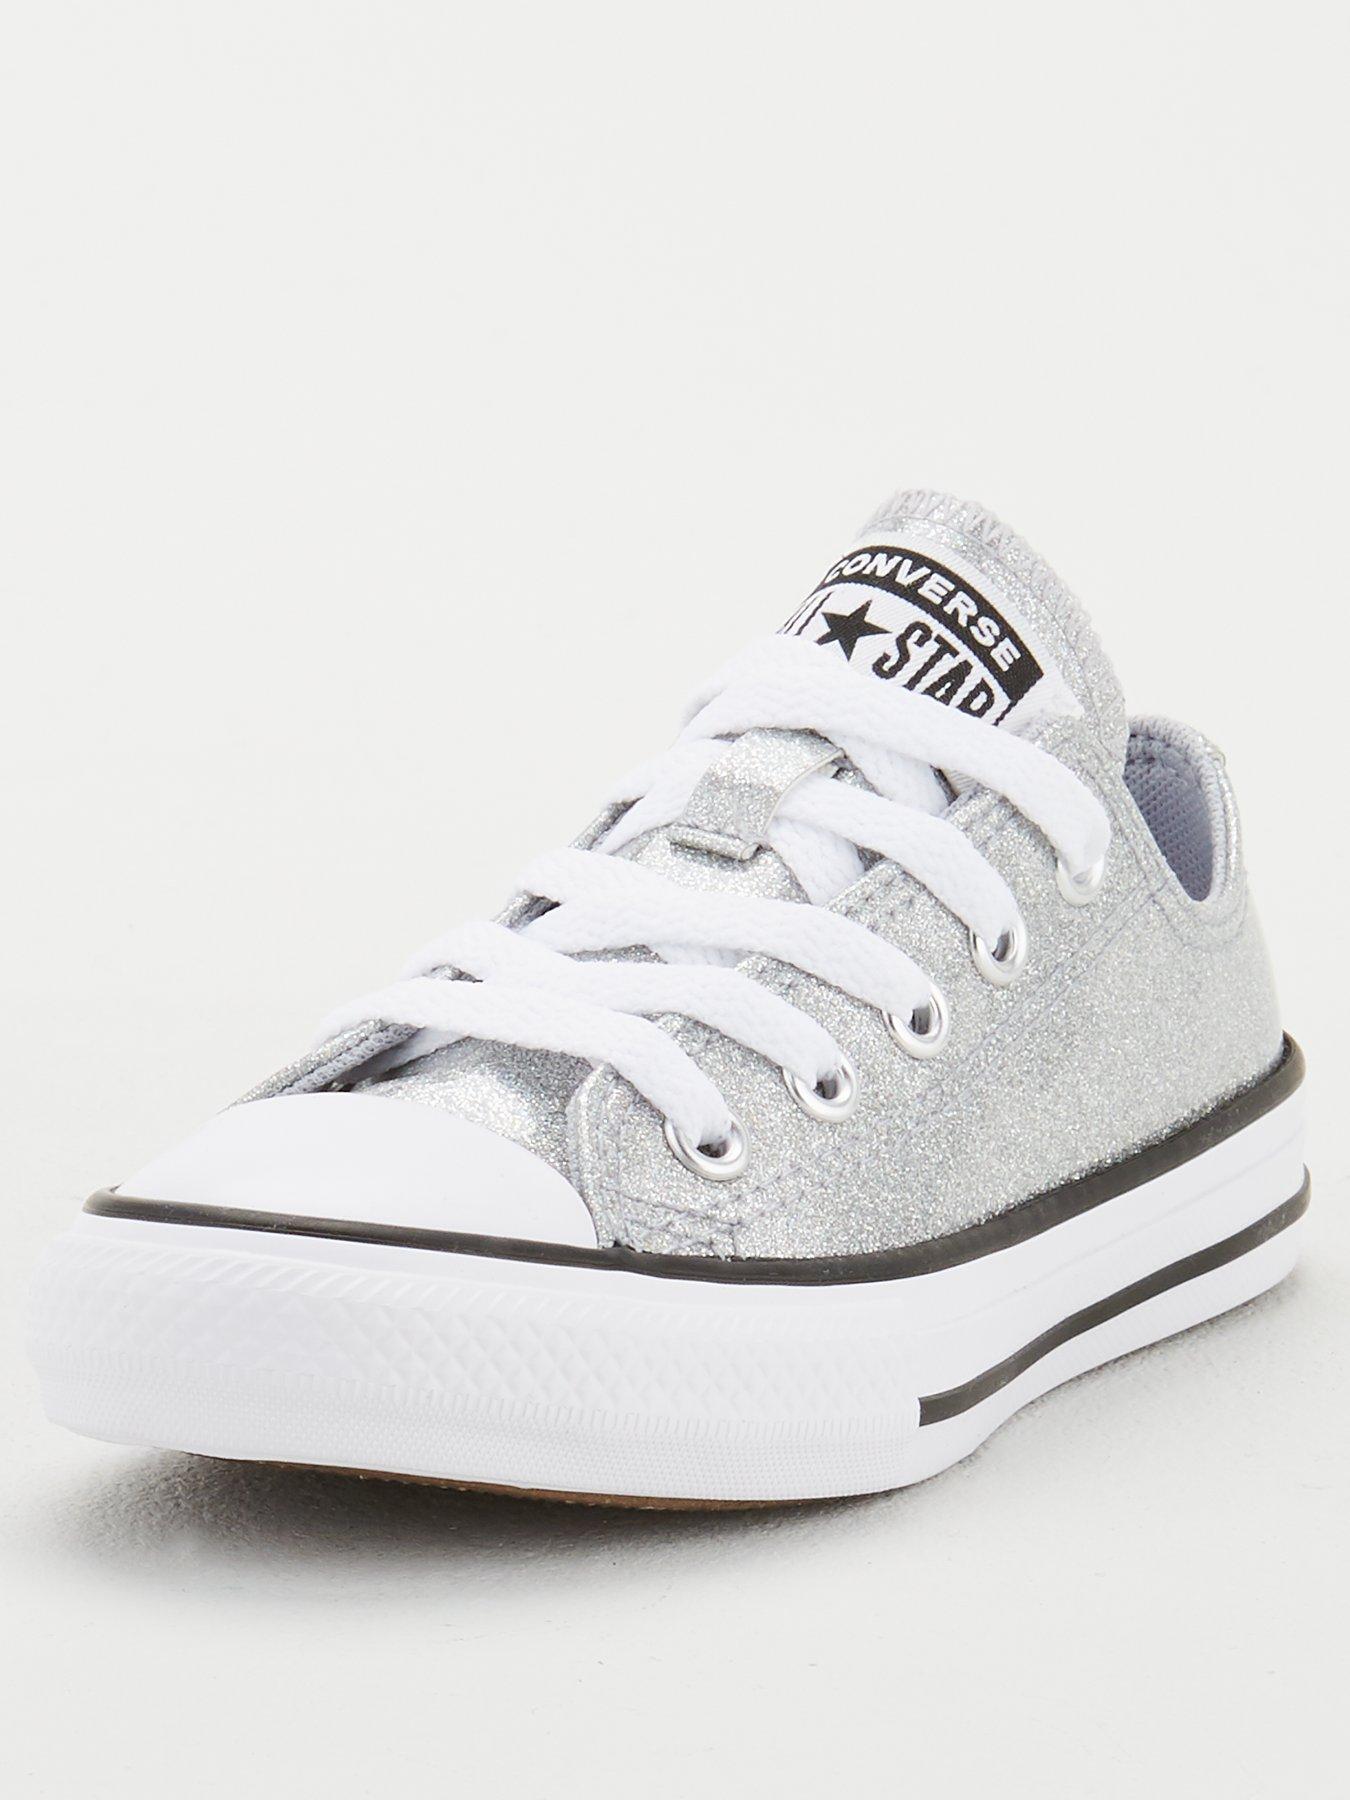 converse trainers for toddlers uk